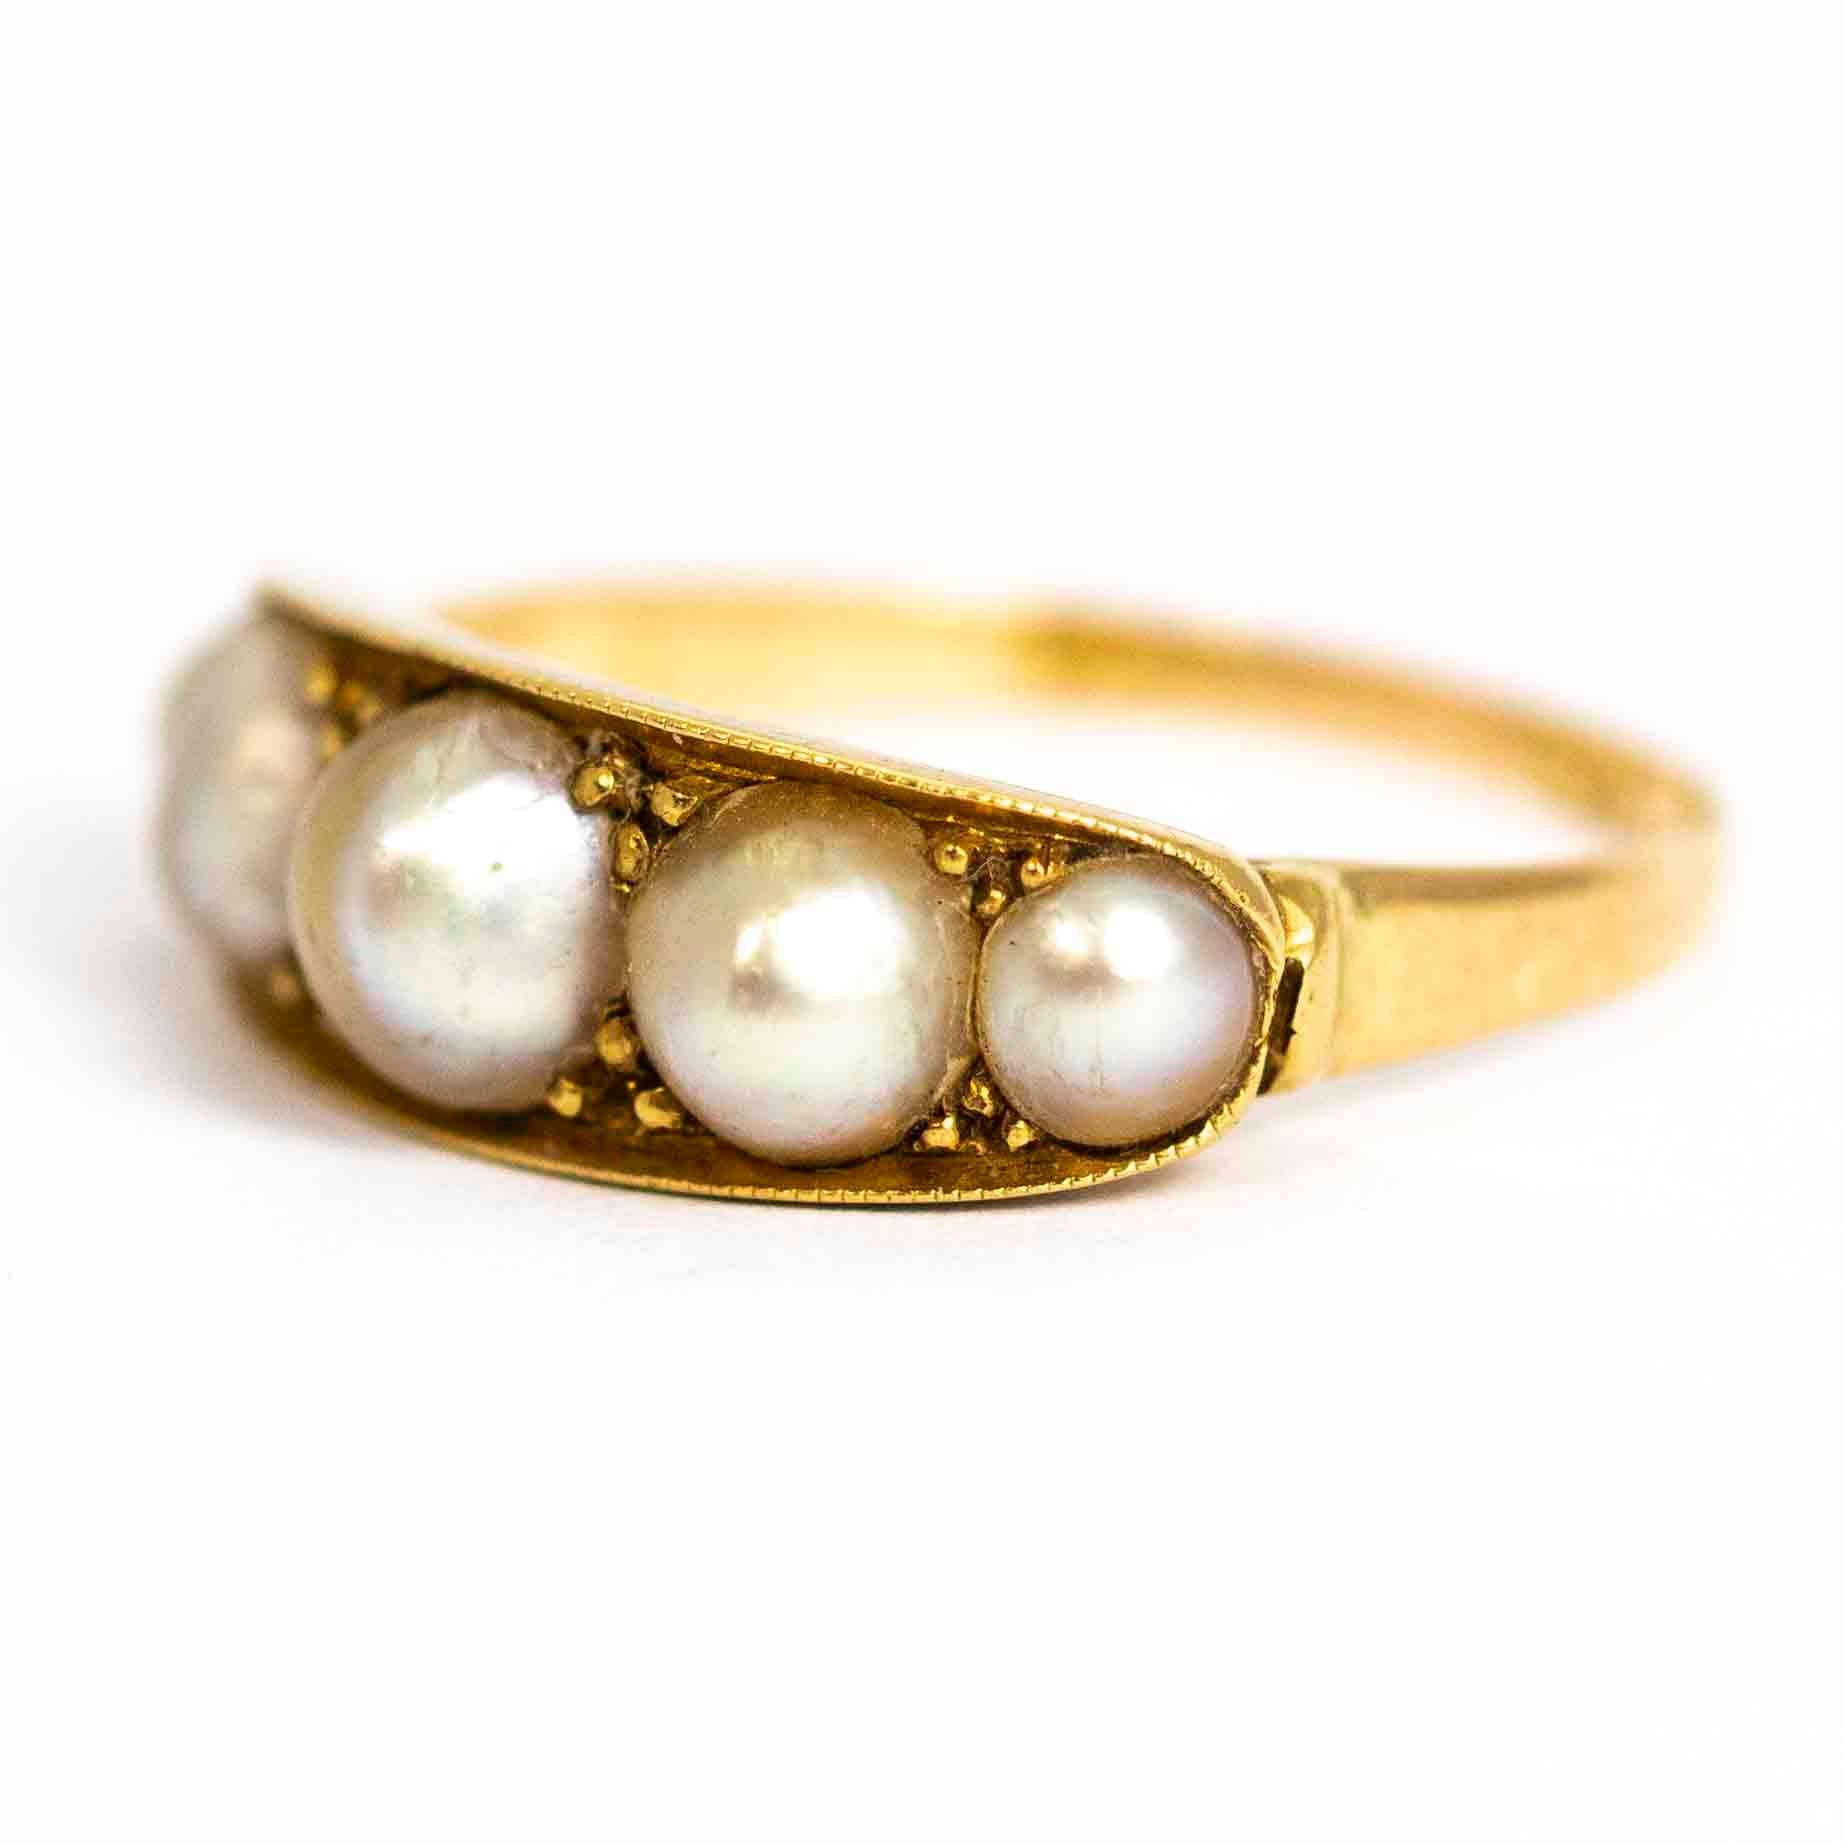 A superb antique Victorian five-stone ring set with stunning graduated pearls. The points between the pearls are set with beautiful triple claw decoration. Modelled in 15 carat yellow gold.

Ring Size: UK K 1/2, 5 3/4